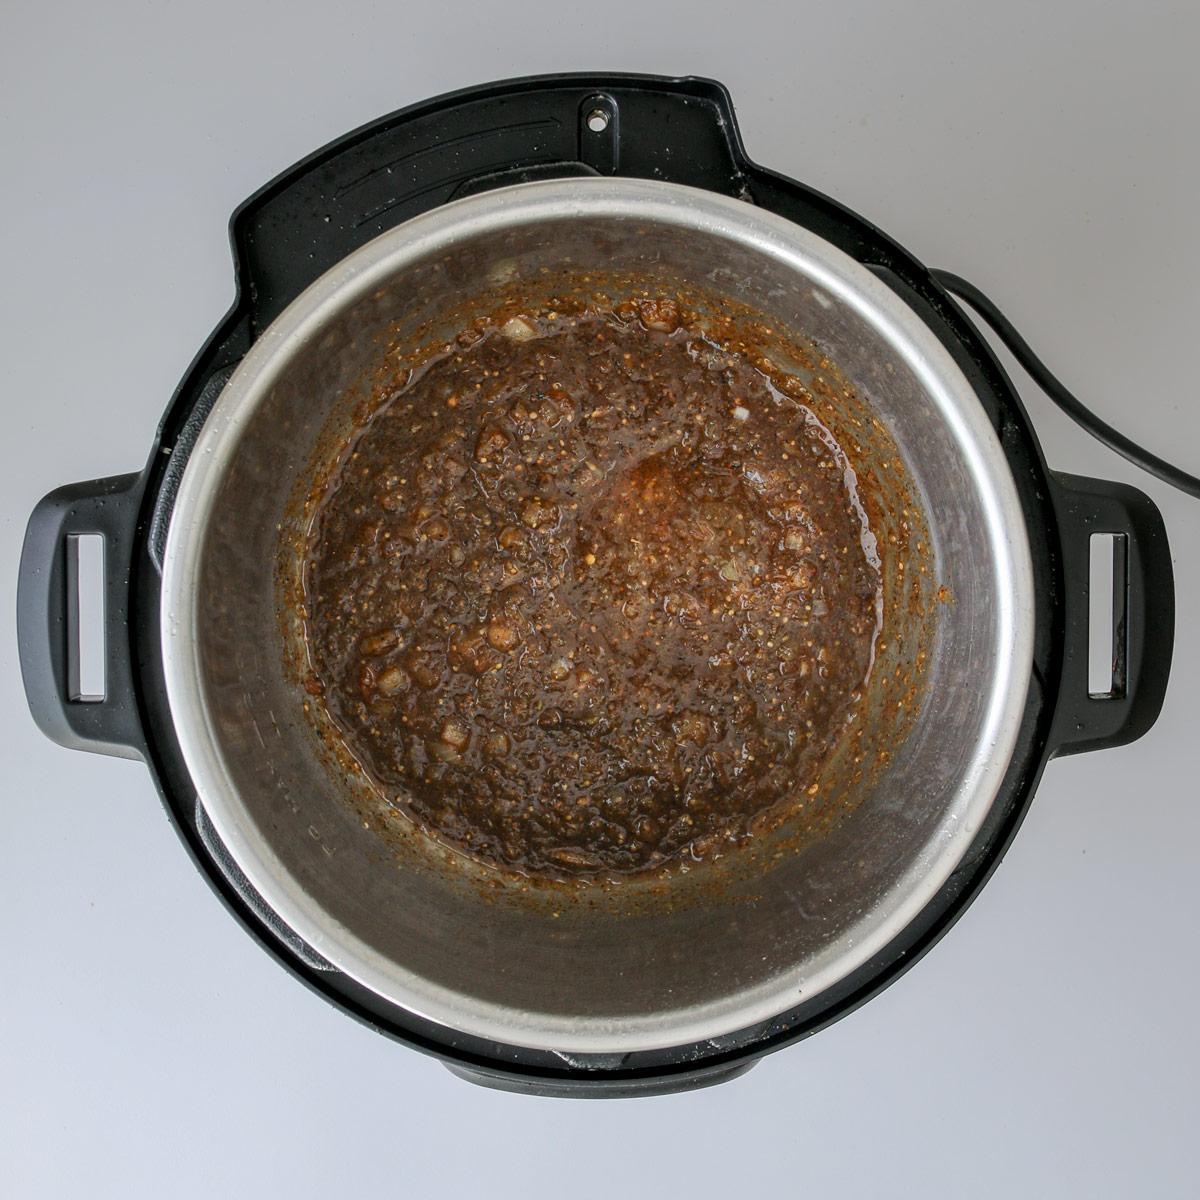 salsa spices and onions in pressure cooker.